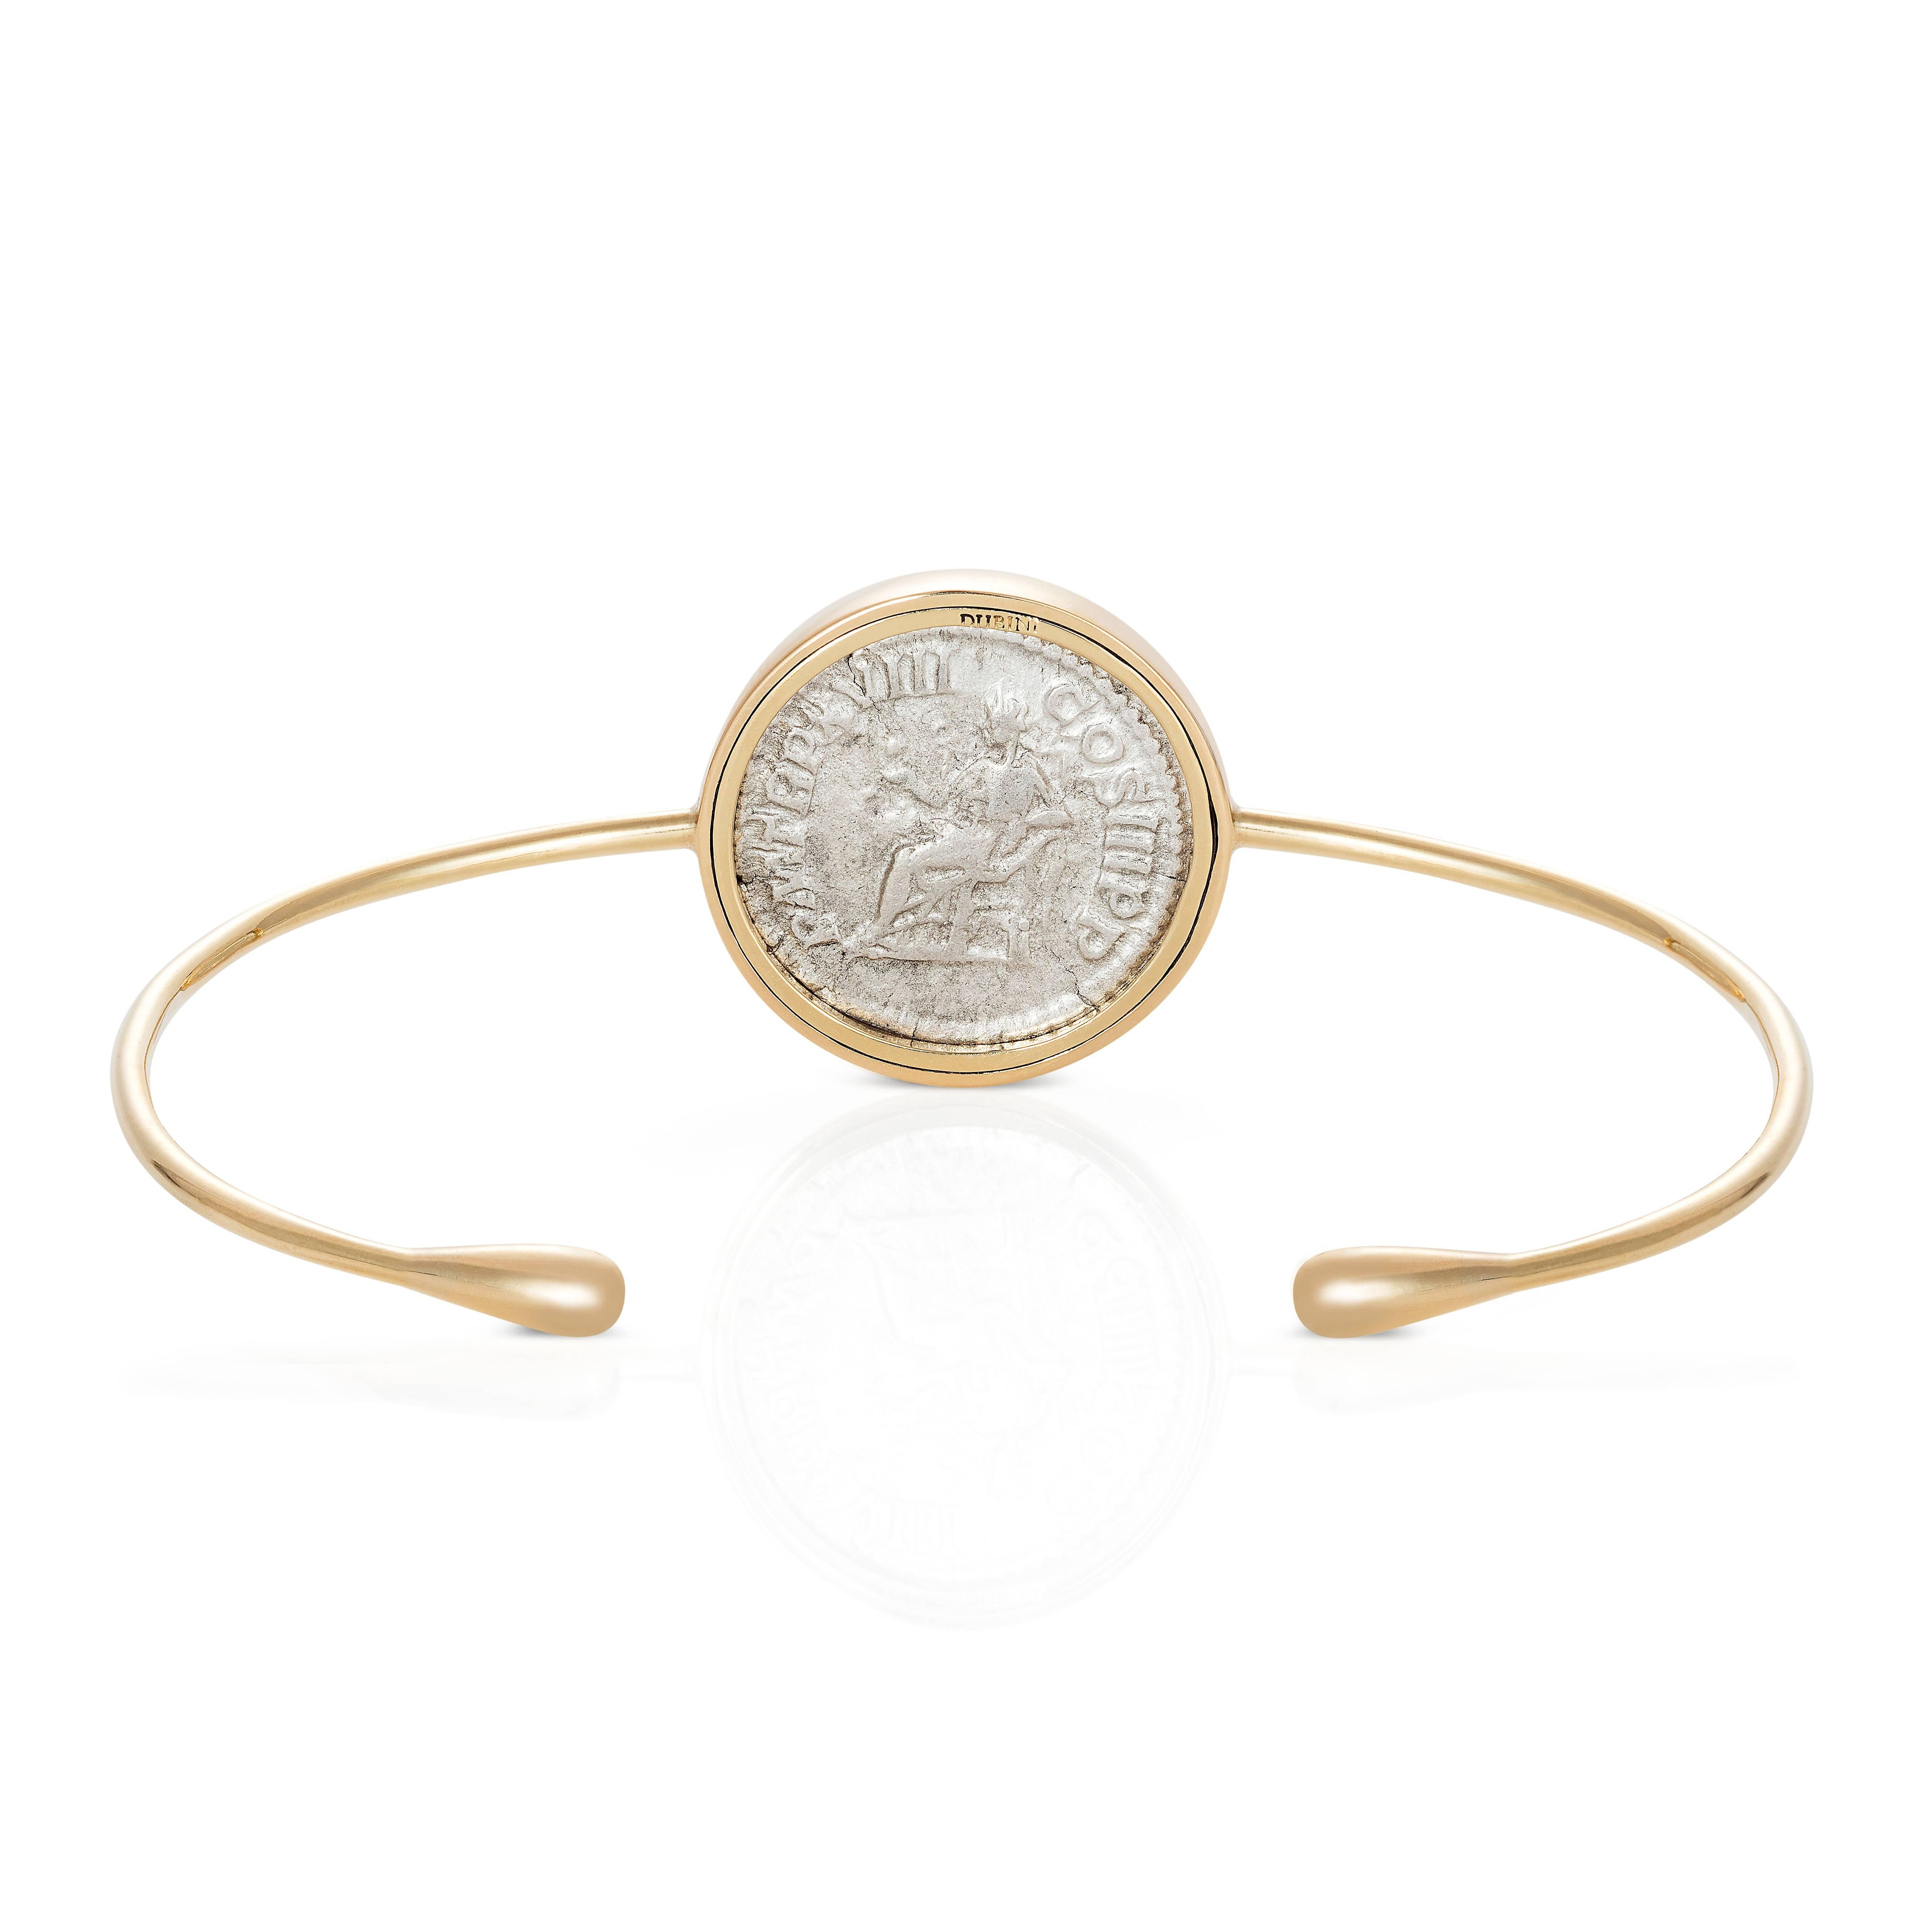 This DUBINI coin bracelet from the 'Empires' collection features an authentic Roman Imperial coin minted circa 210 - 211 A.D. set in 18K yellow gold.

* Due to the unique process of hand carving coins in ancient times, there may be a few stylistic